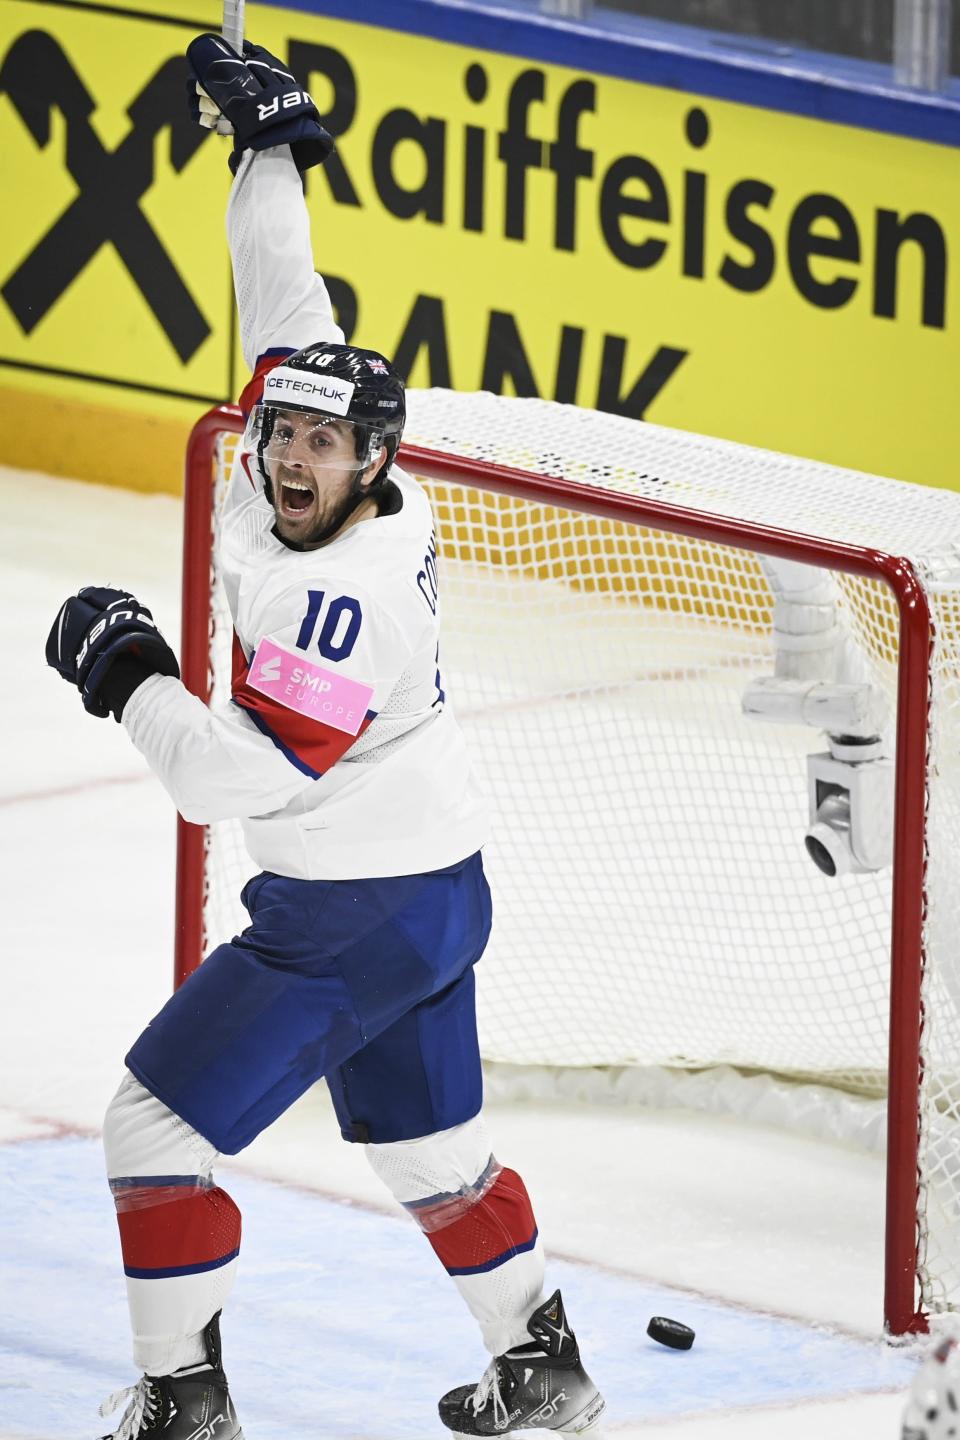 Scott Conway of Great Britain celebrates 3-3 goal during the 2022 IIHF Ice Hockey World Championships preliminary round group B match between Norway and Great Britain in Tampere, Finland, Sunday May 15, 2022. (Emmi Korhonen/Lehtikuva via AP)